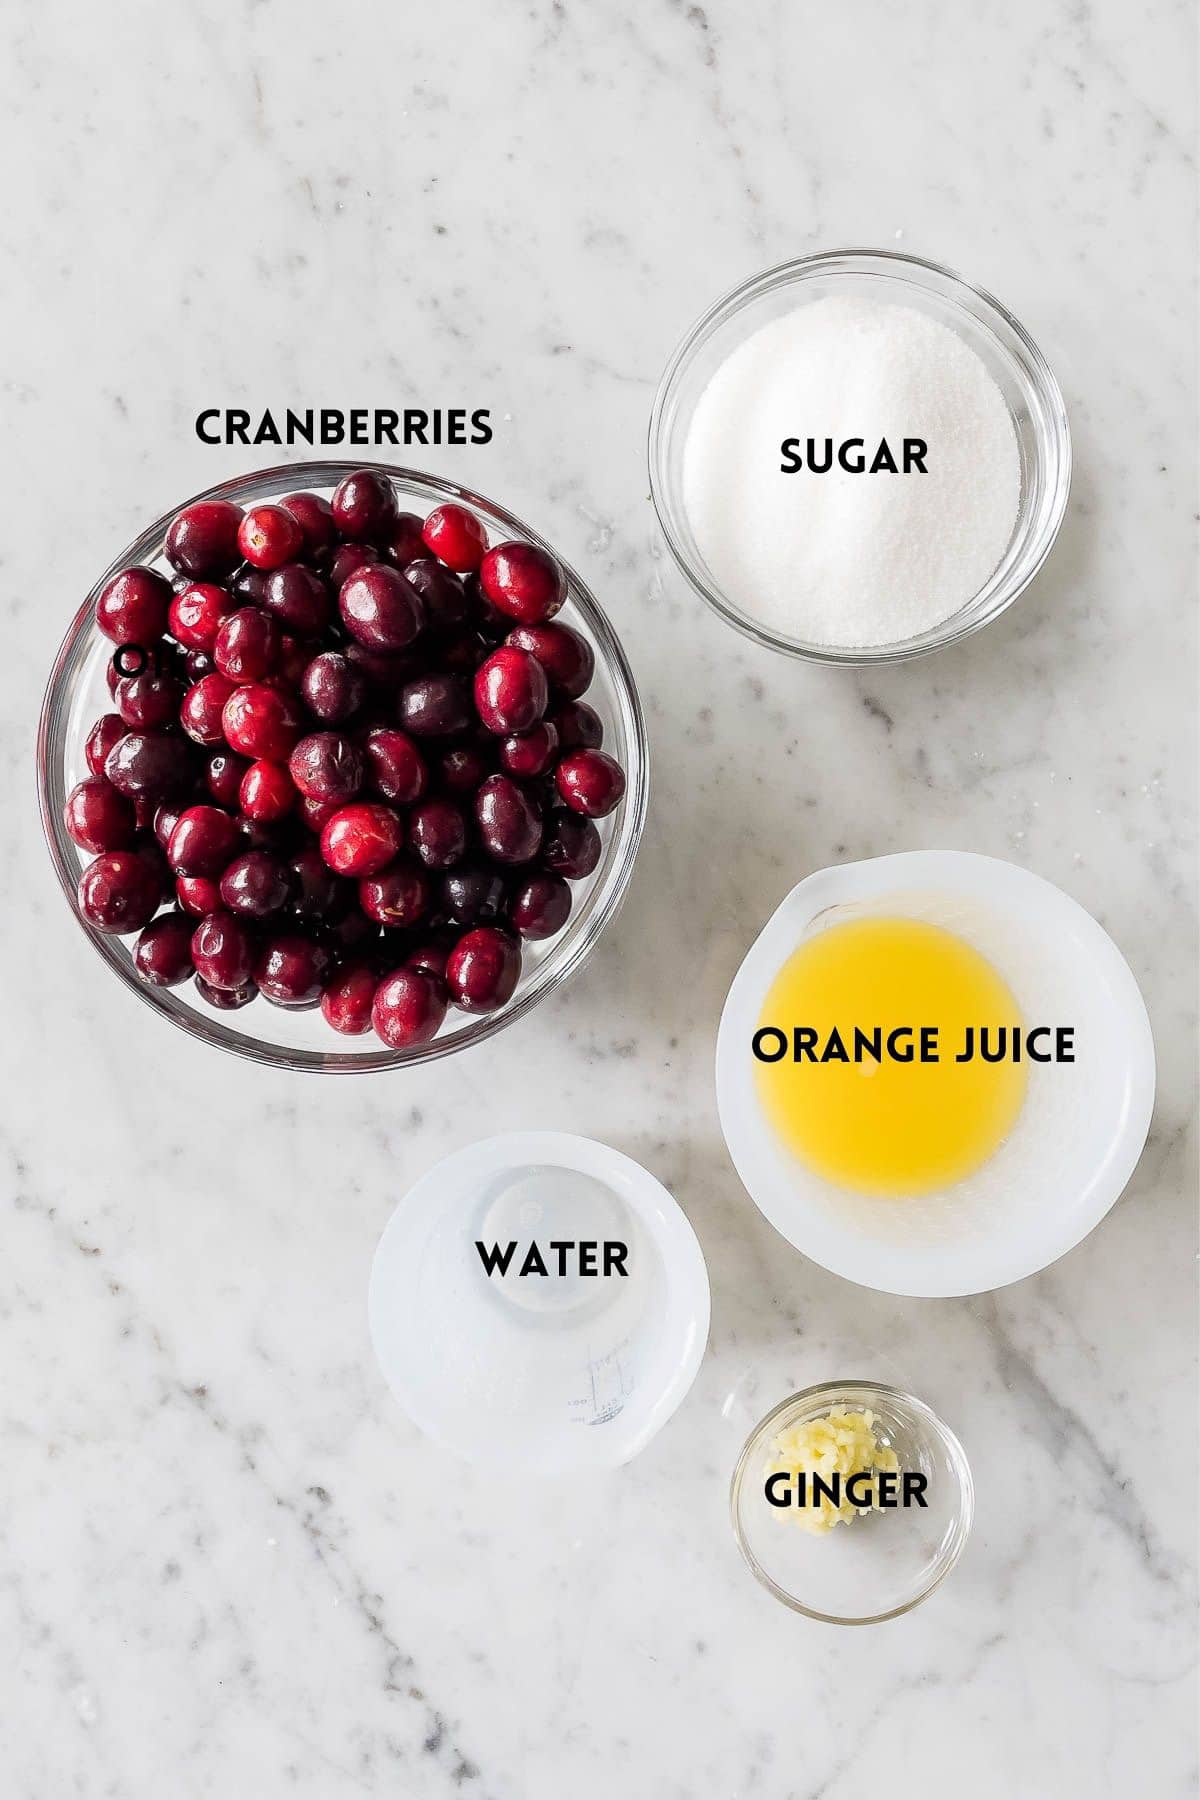 Ingredients needed for cranberry sauce in small bowls on a marble surface.